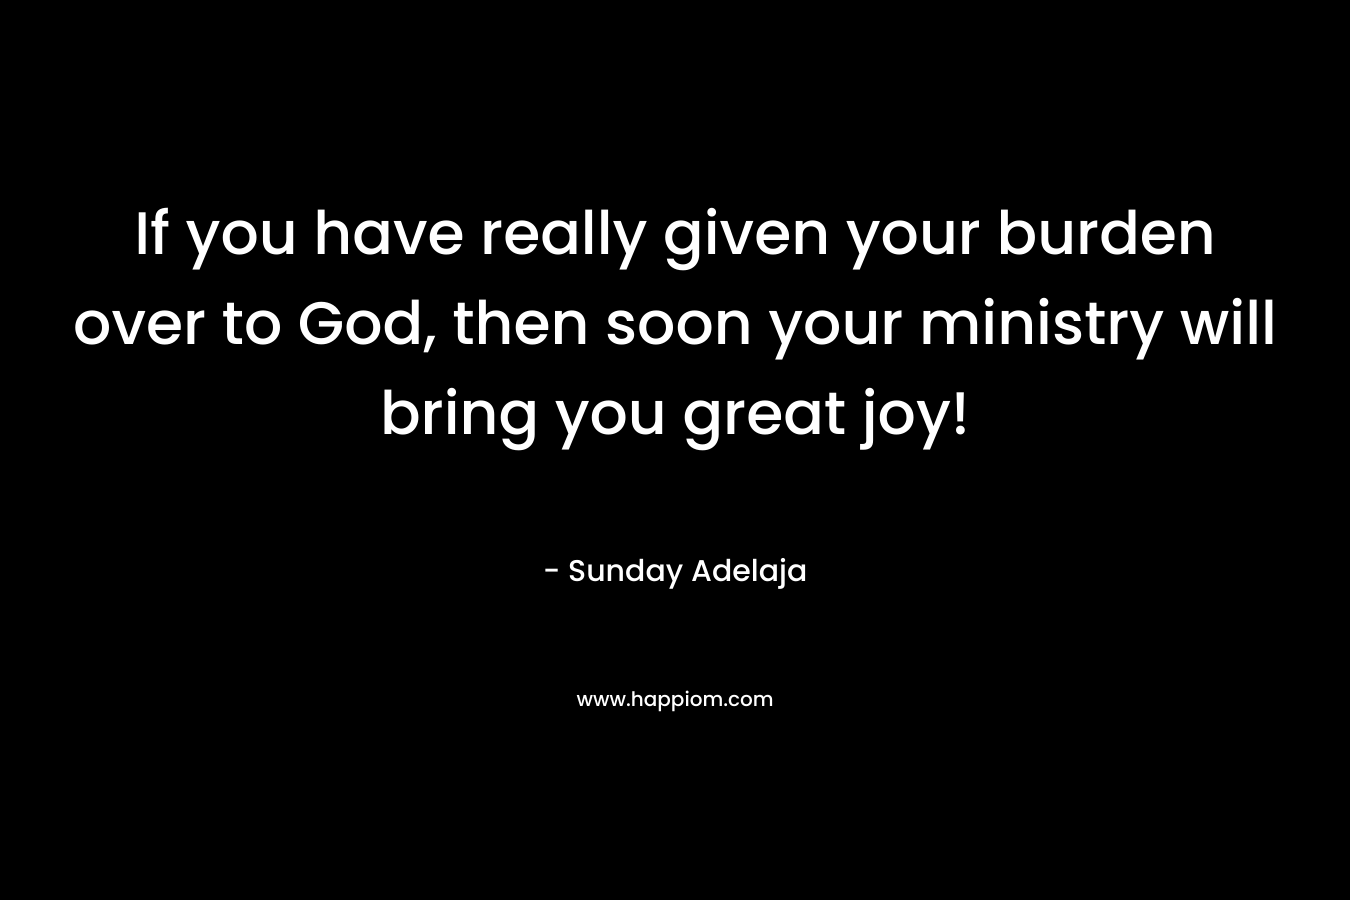 If you have really given your burden over to God, then soon your ministry will bring you great joy!